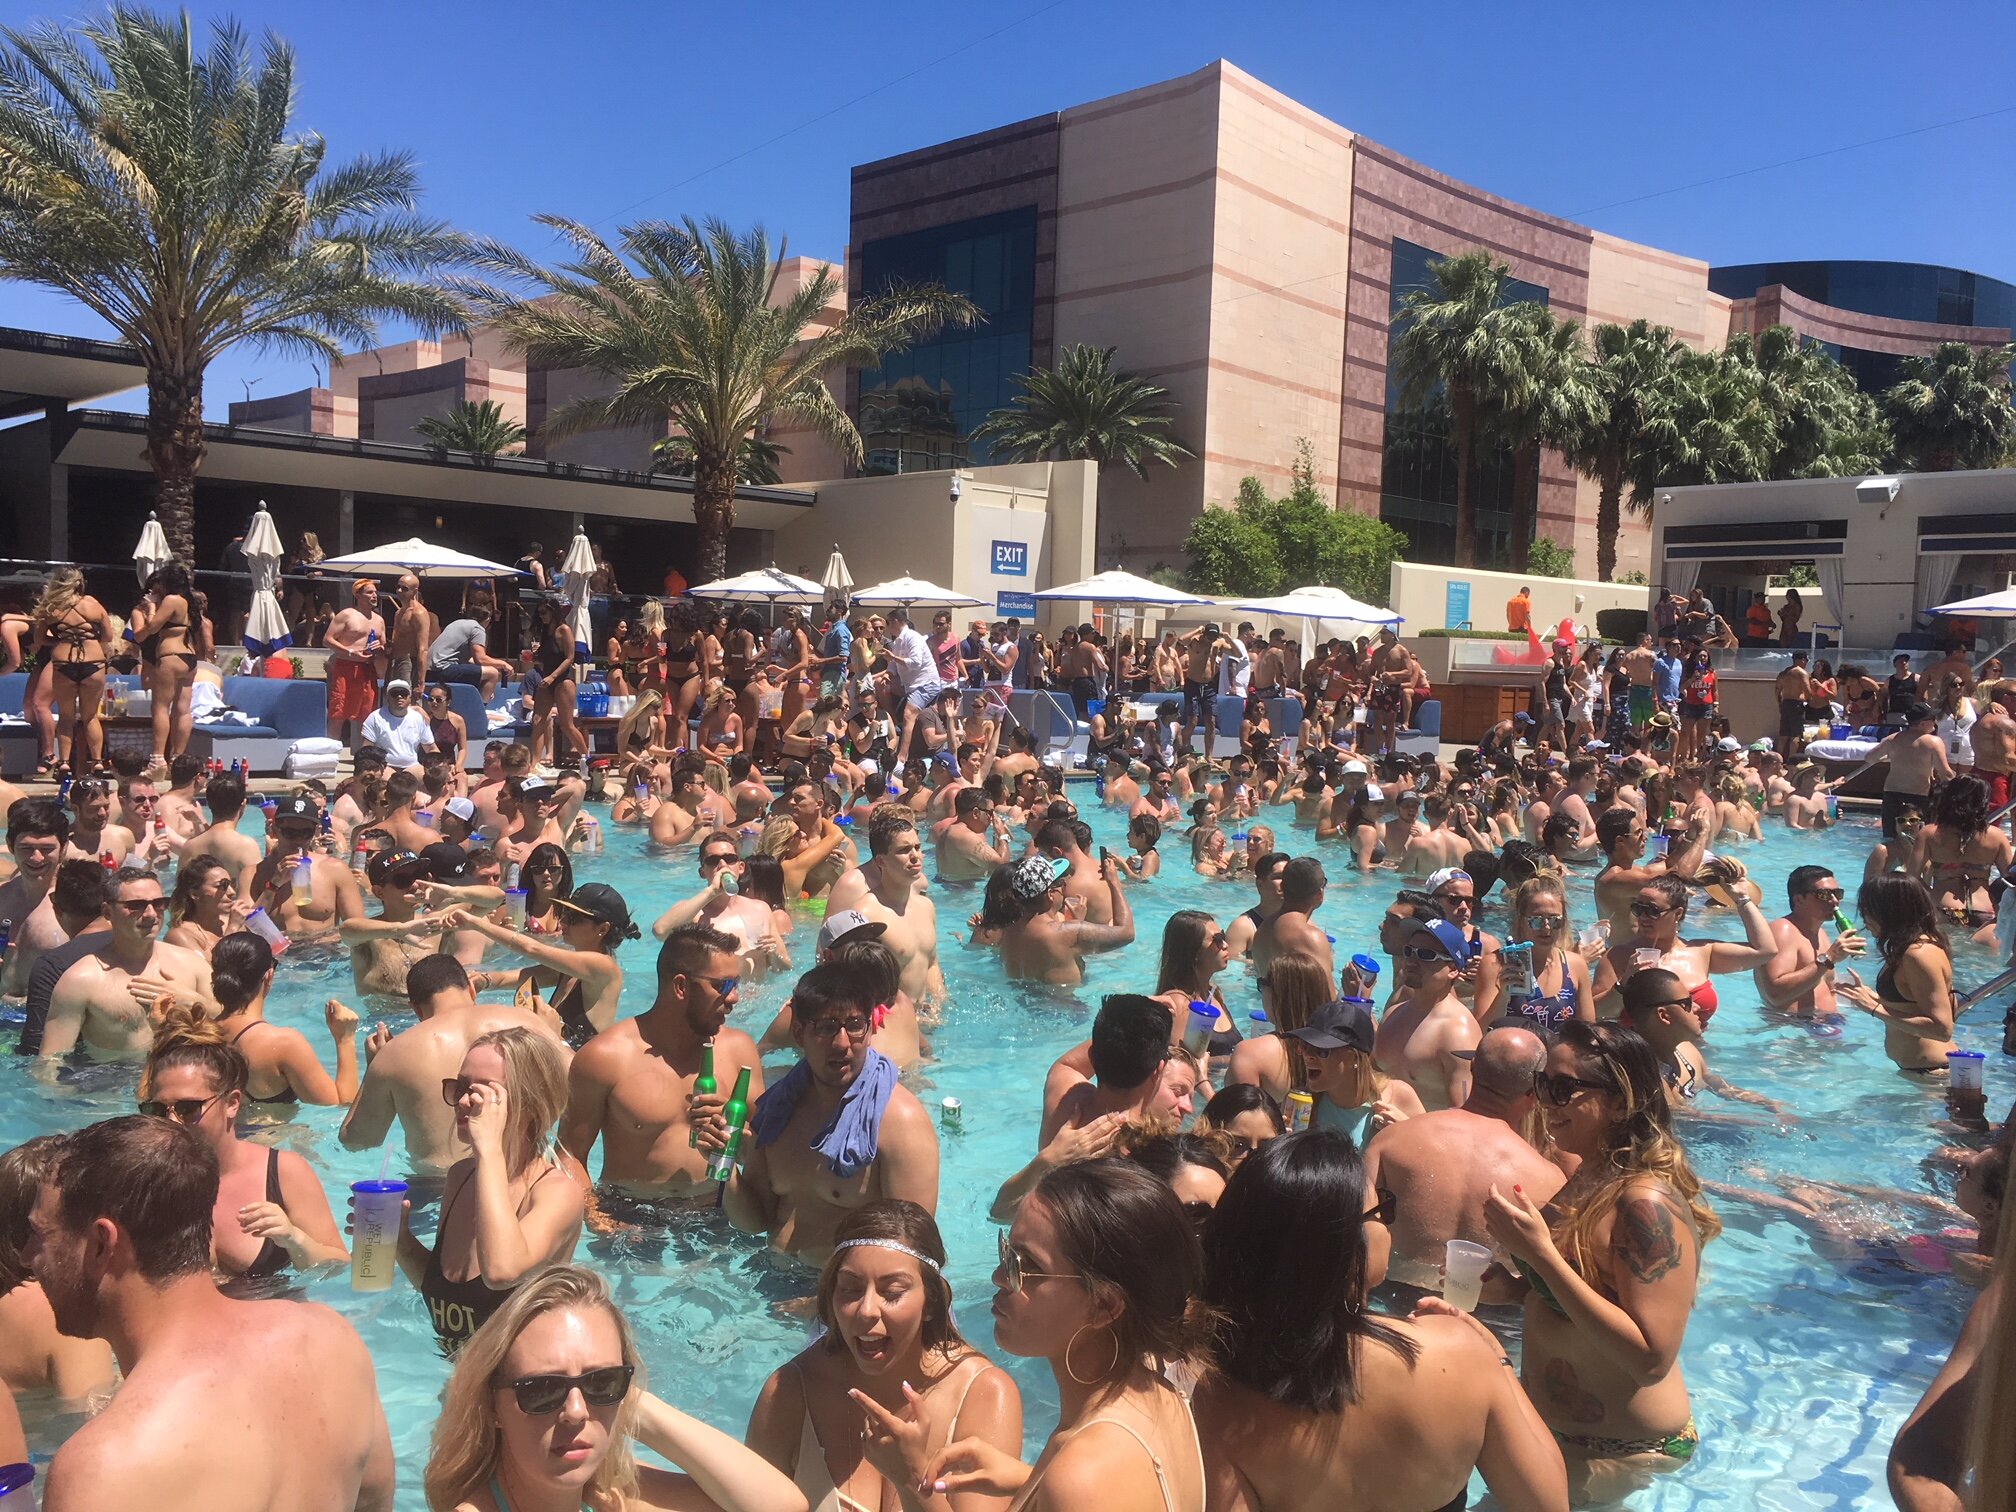 Las Vegas Travel Guide - Top things to do when in Las Vegas - Wet Republic Pool Party